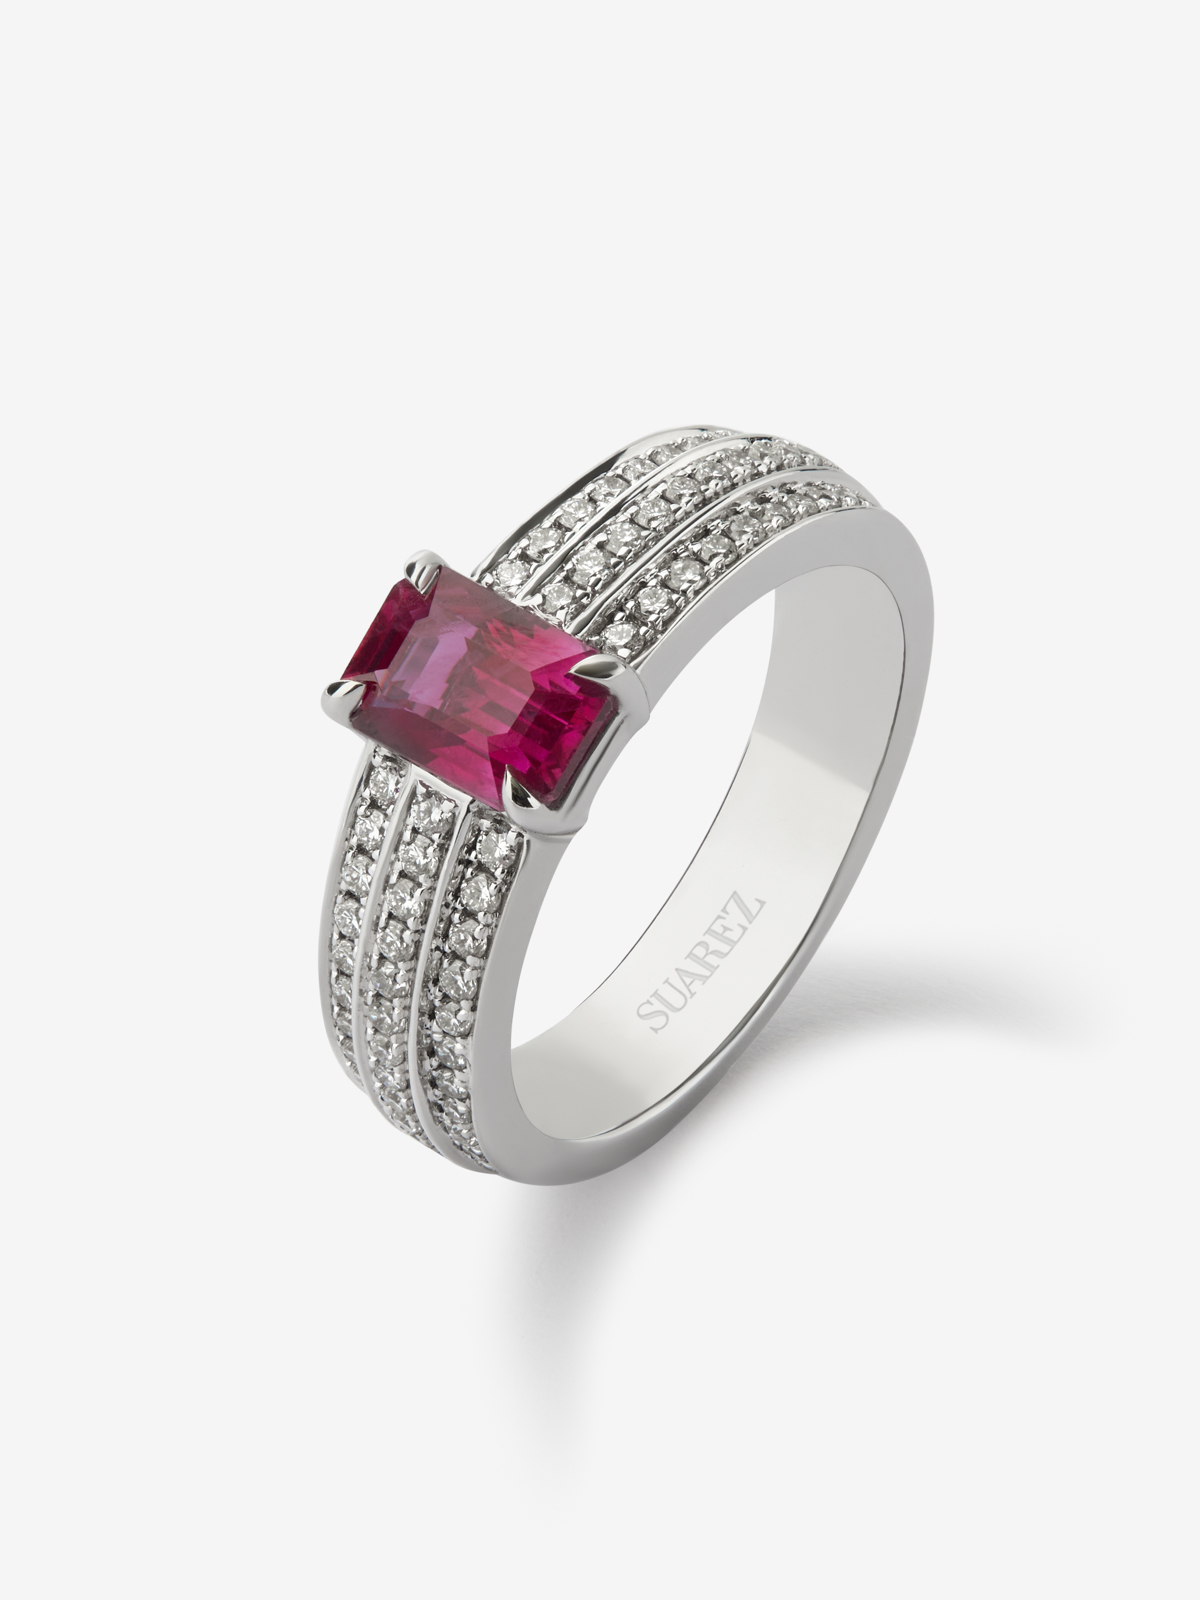 18K white gold ring with octagonal-cut pigeon blood ruby ​​of 1.169 cts and 68 brilliant-cut diamonds with a total of 0.37 cts